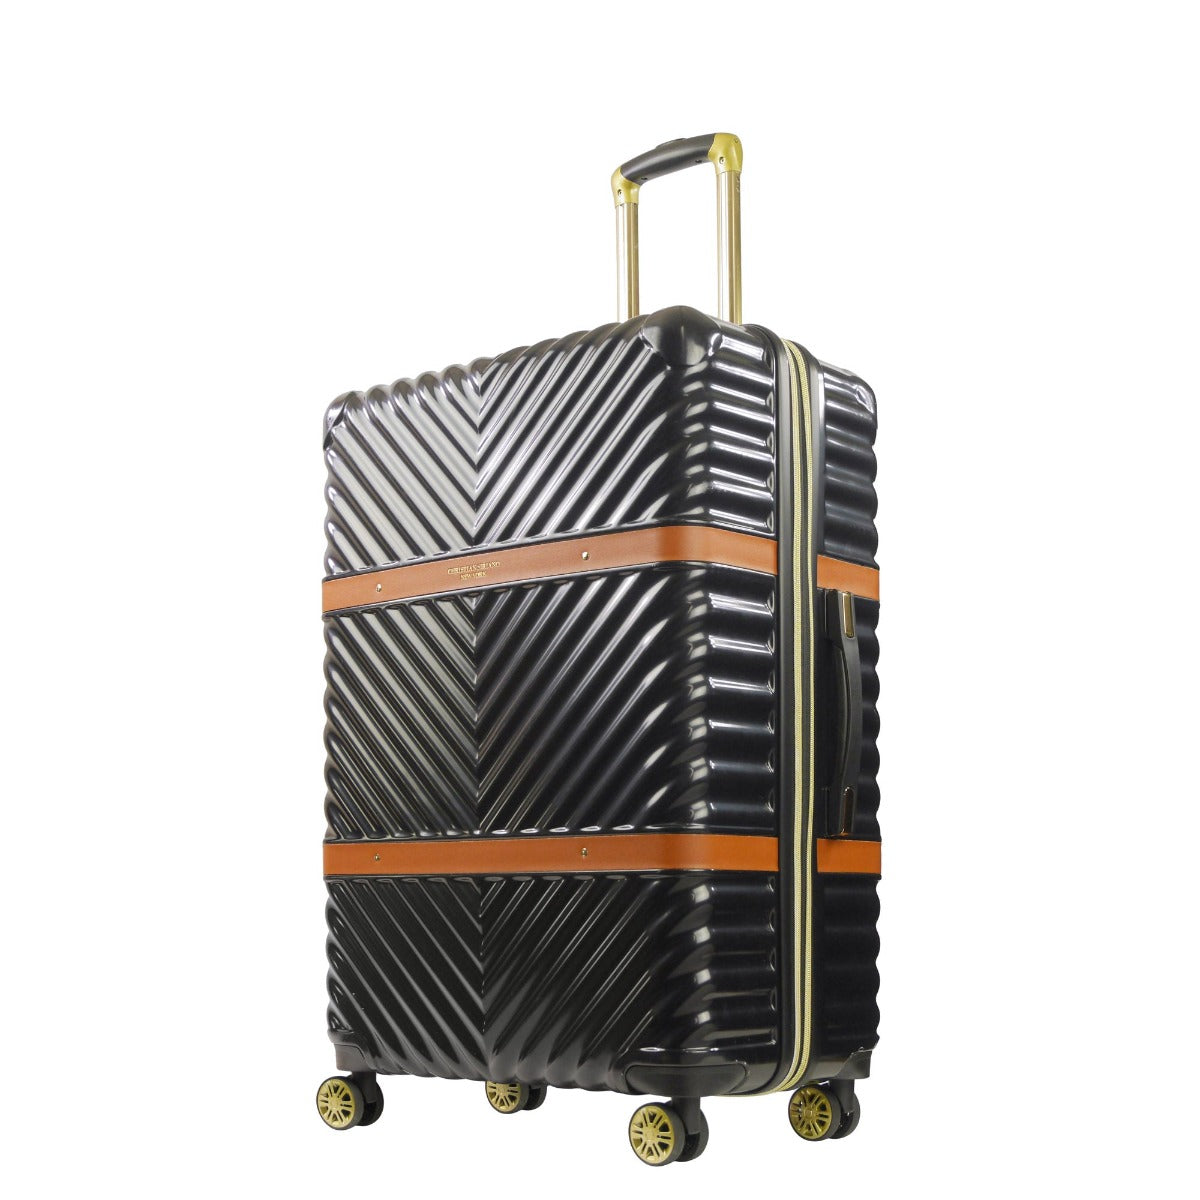 Christian Siriano New York Stella 29" black checked luggage hardside spinner suitcase - best durable suitcases for travel